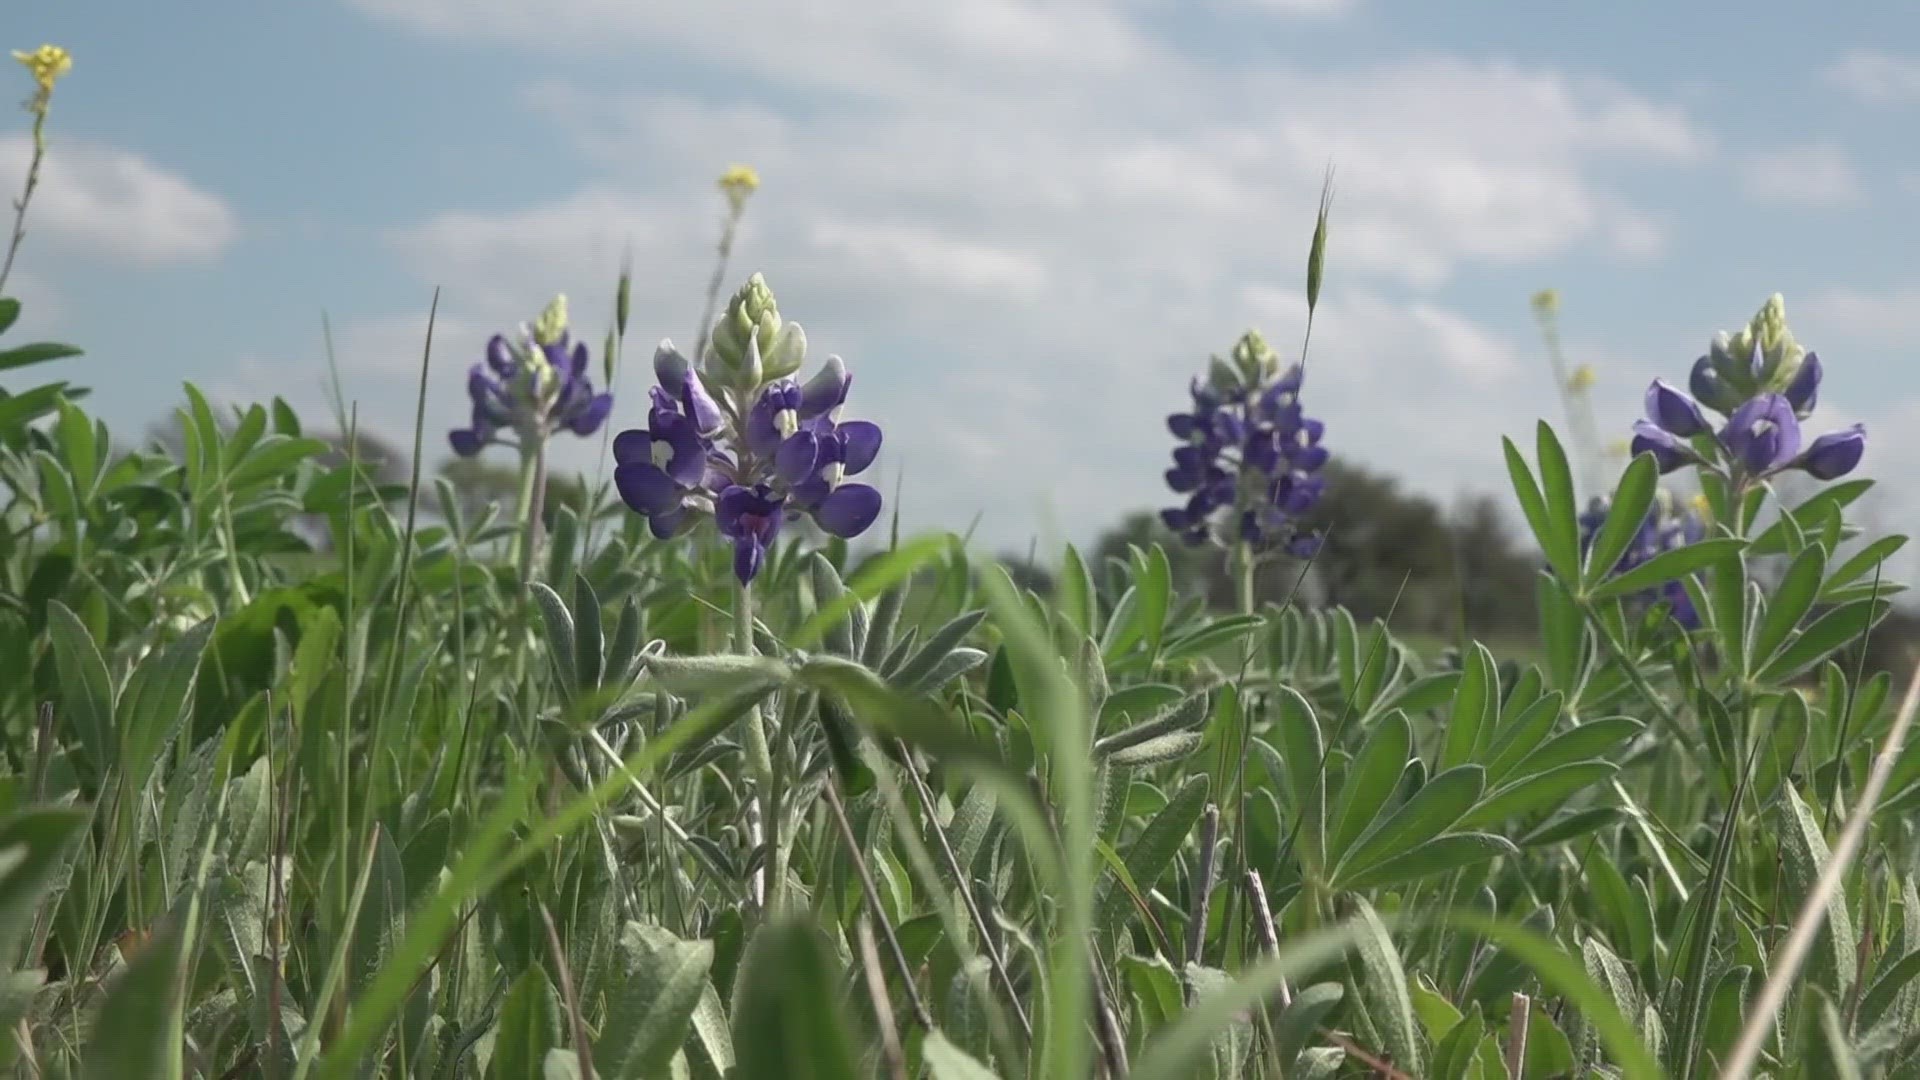 Wild animals like snakes and scorpions tend to reside in bluebonnet fields, raising the risk of danger.